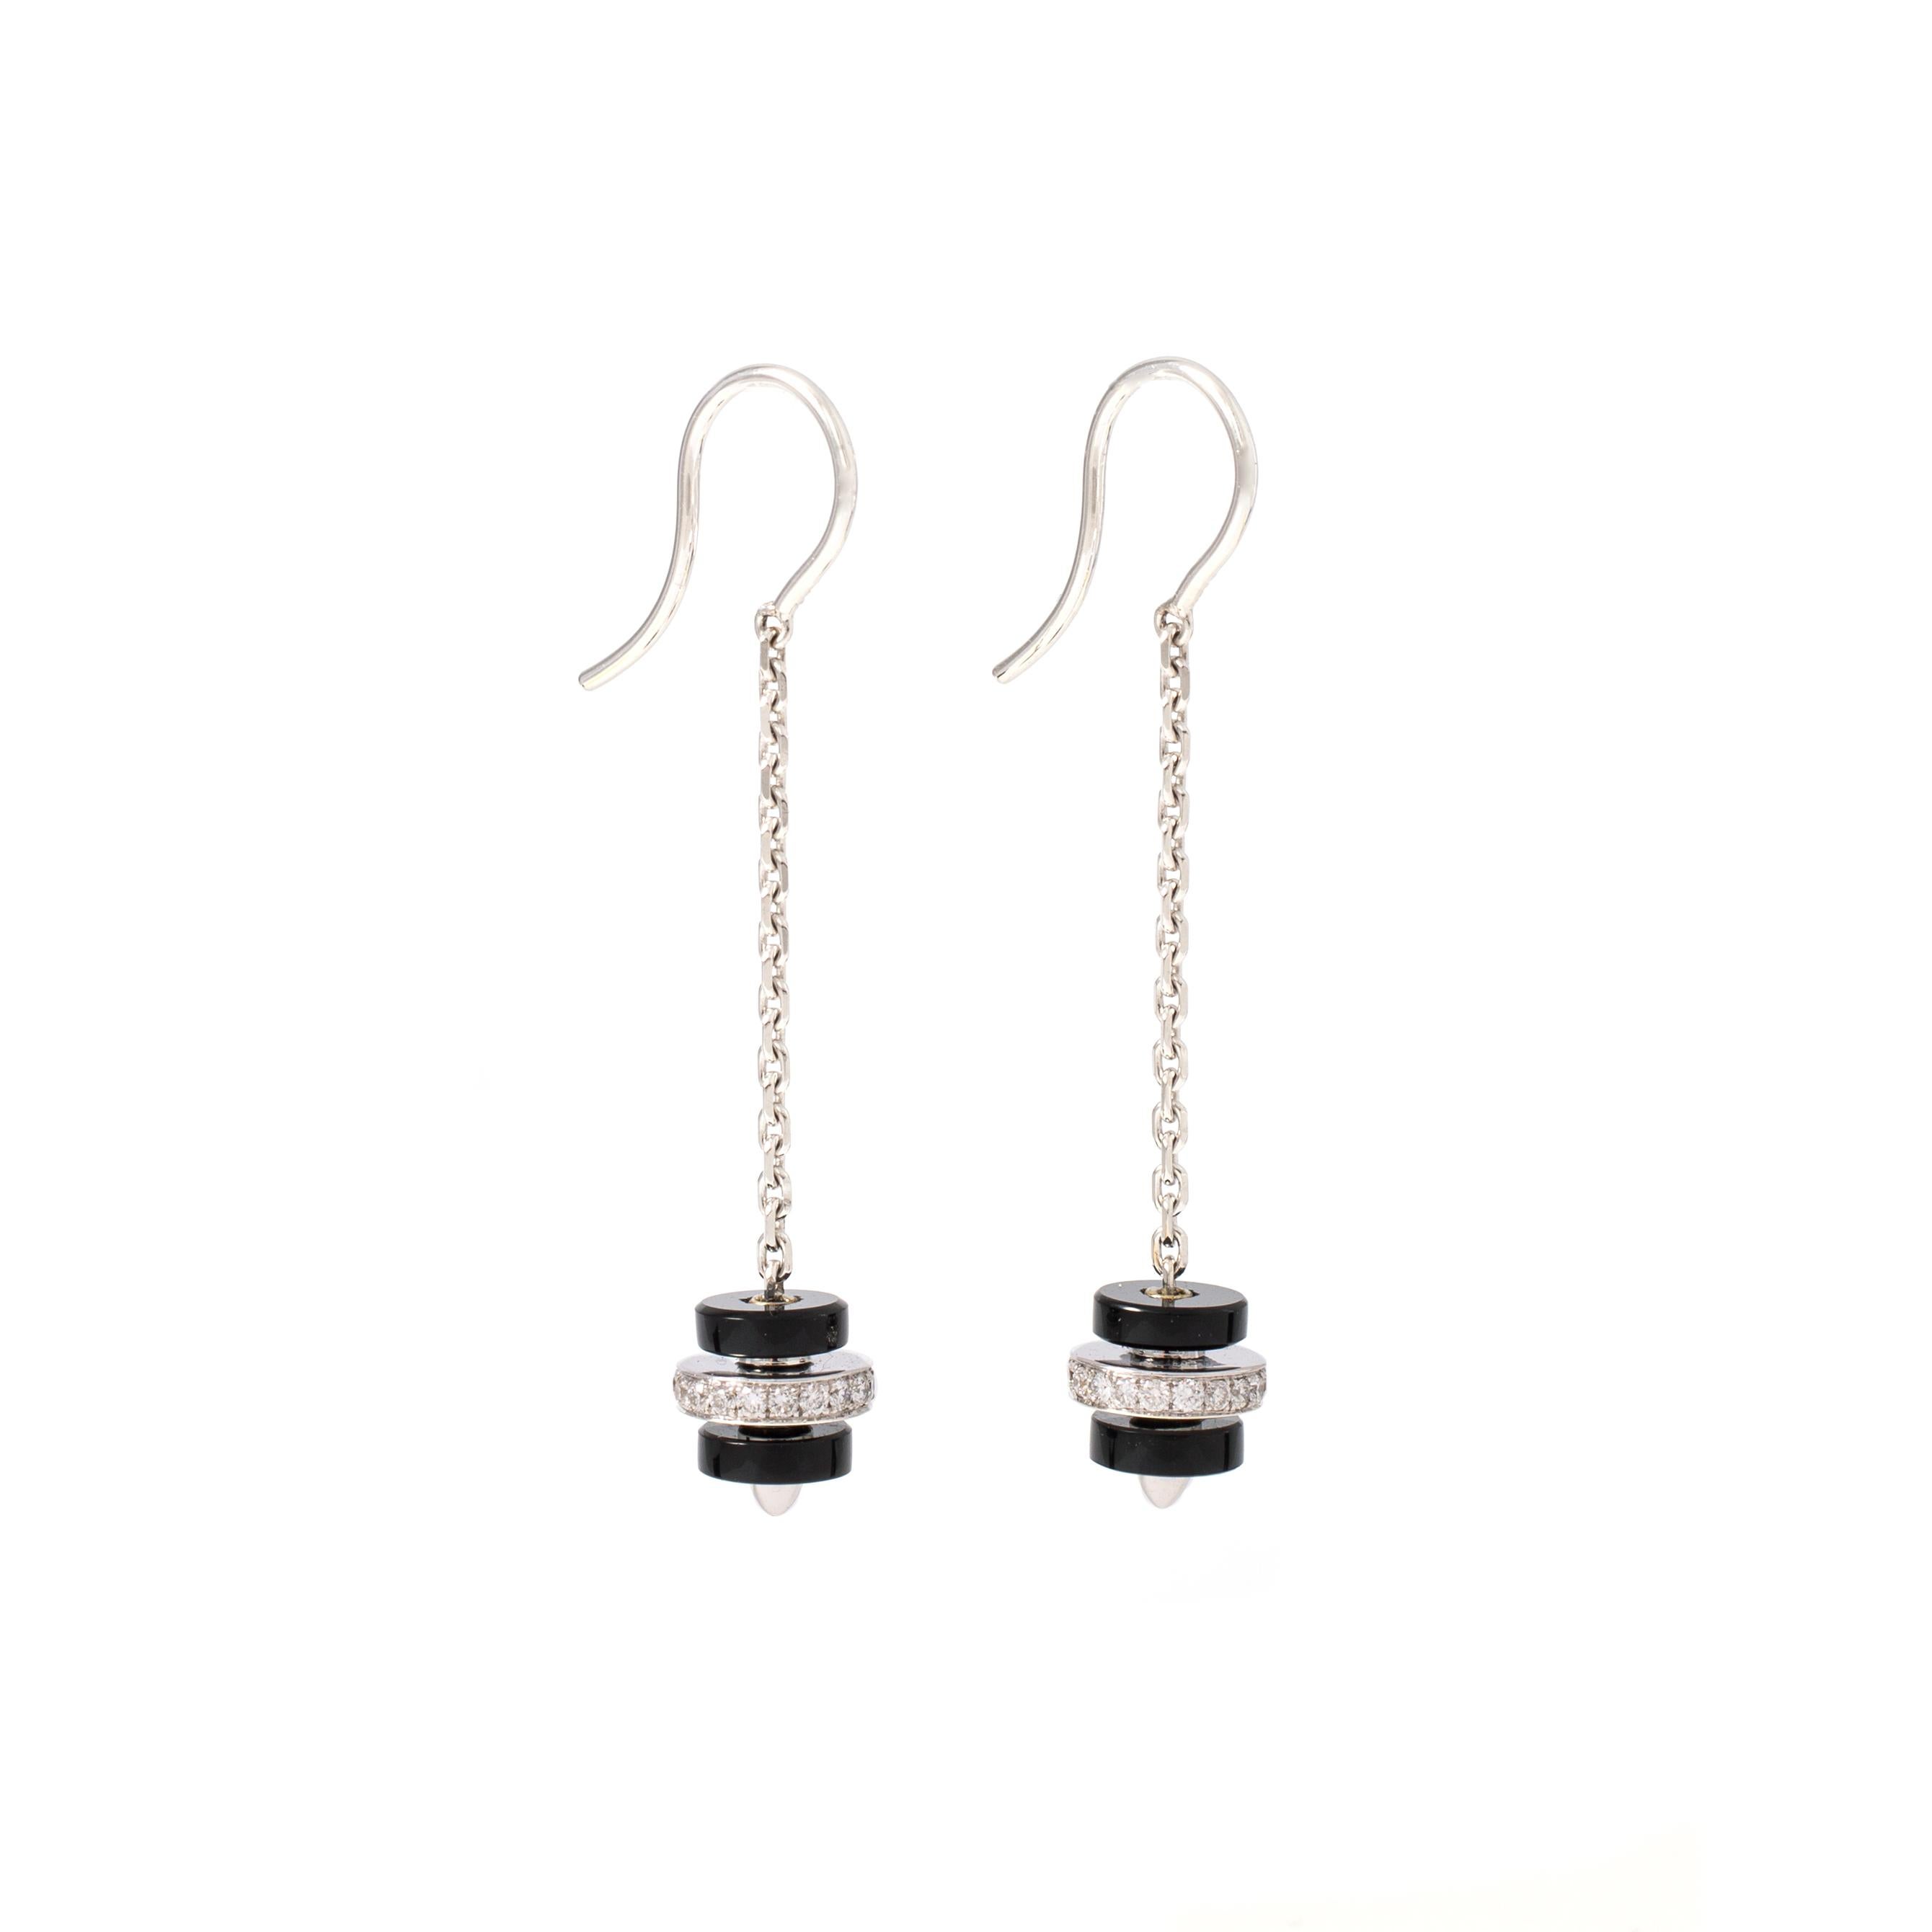 Earrings set with onyx and diamonds on white gold.
Length: 4.70 centimeters.

Total weight: 5.43 grams

